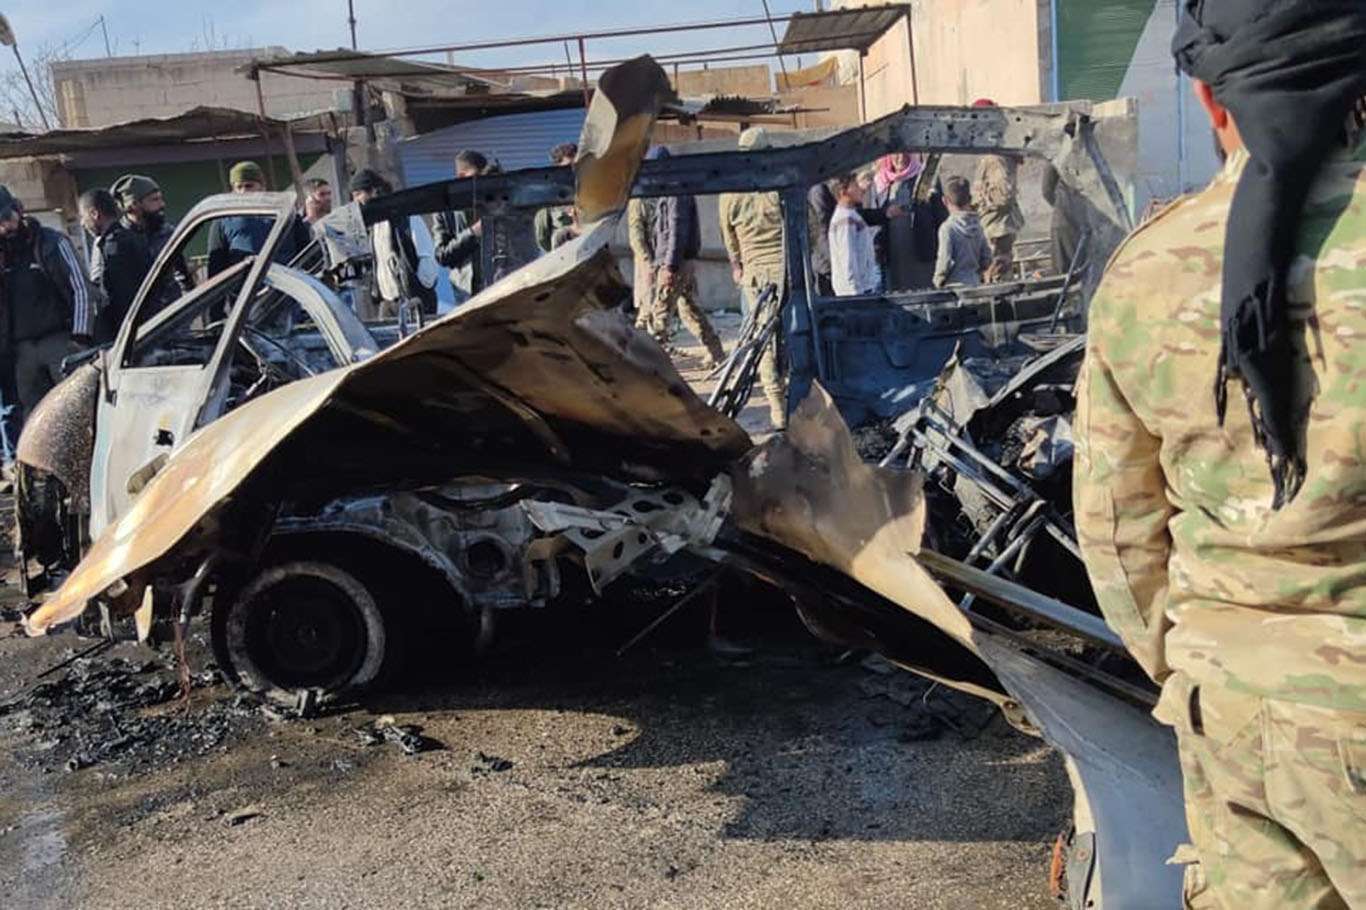 3 civilians killed and 9 others injured in a car bomb attack in northern Syria